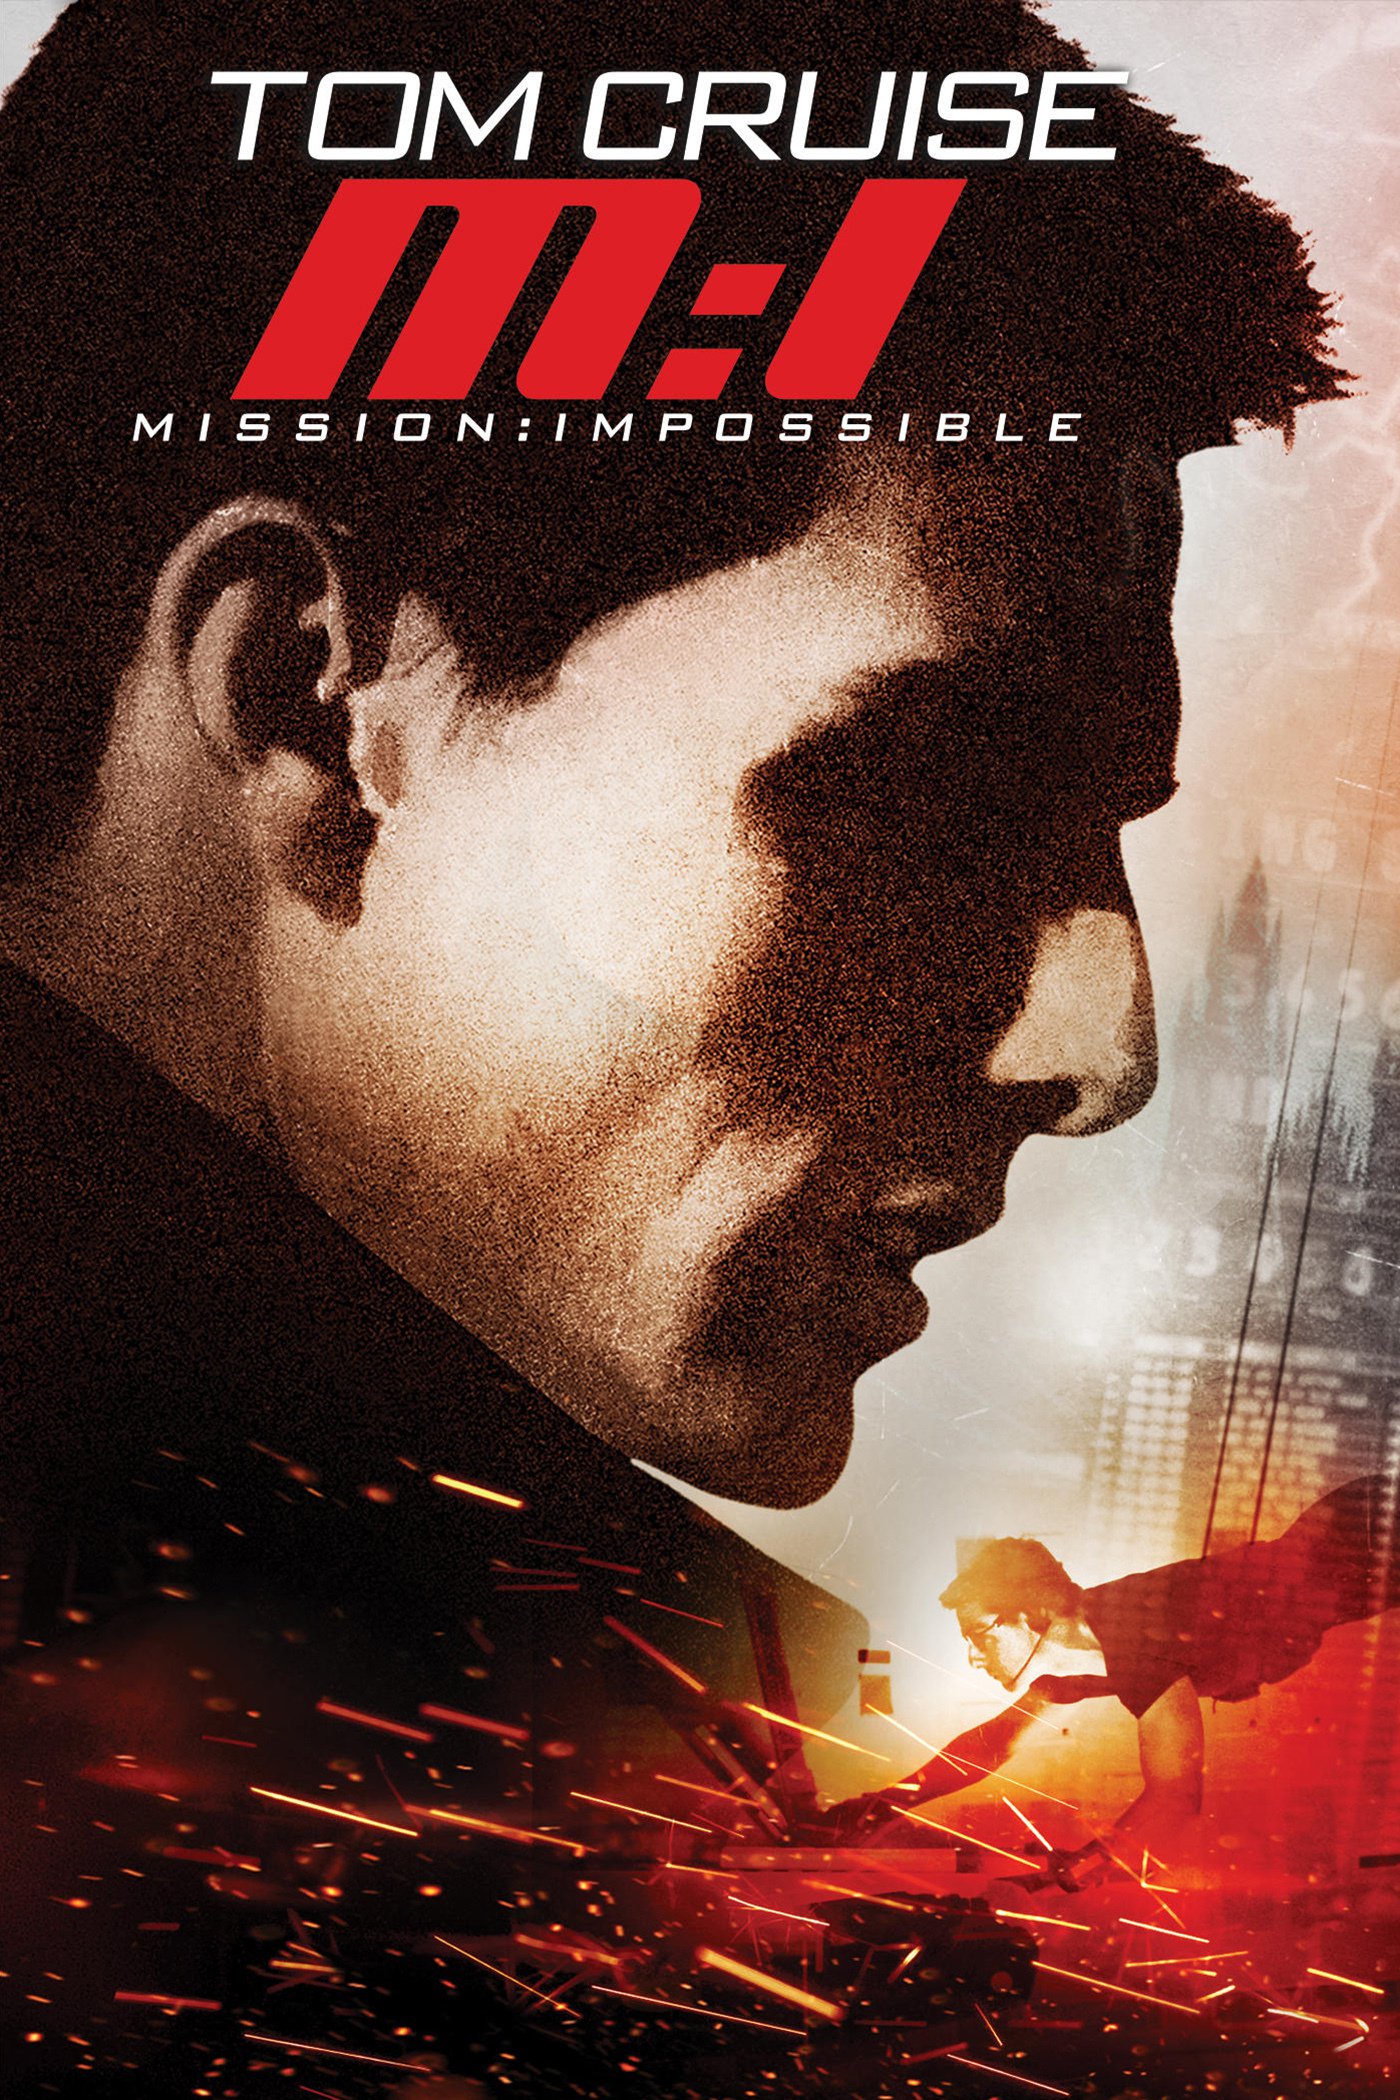 tom cruise 007 mission impossible